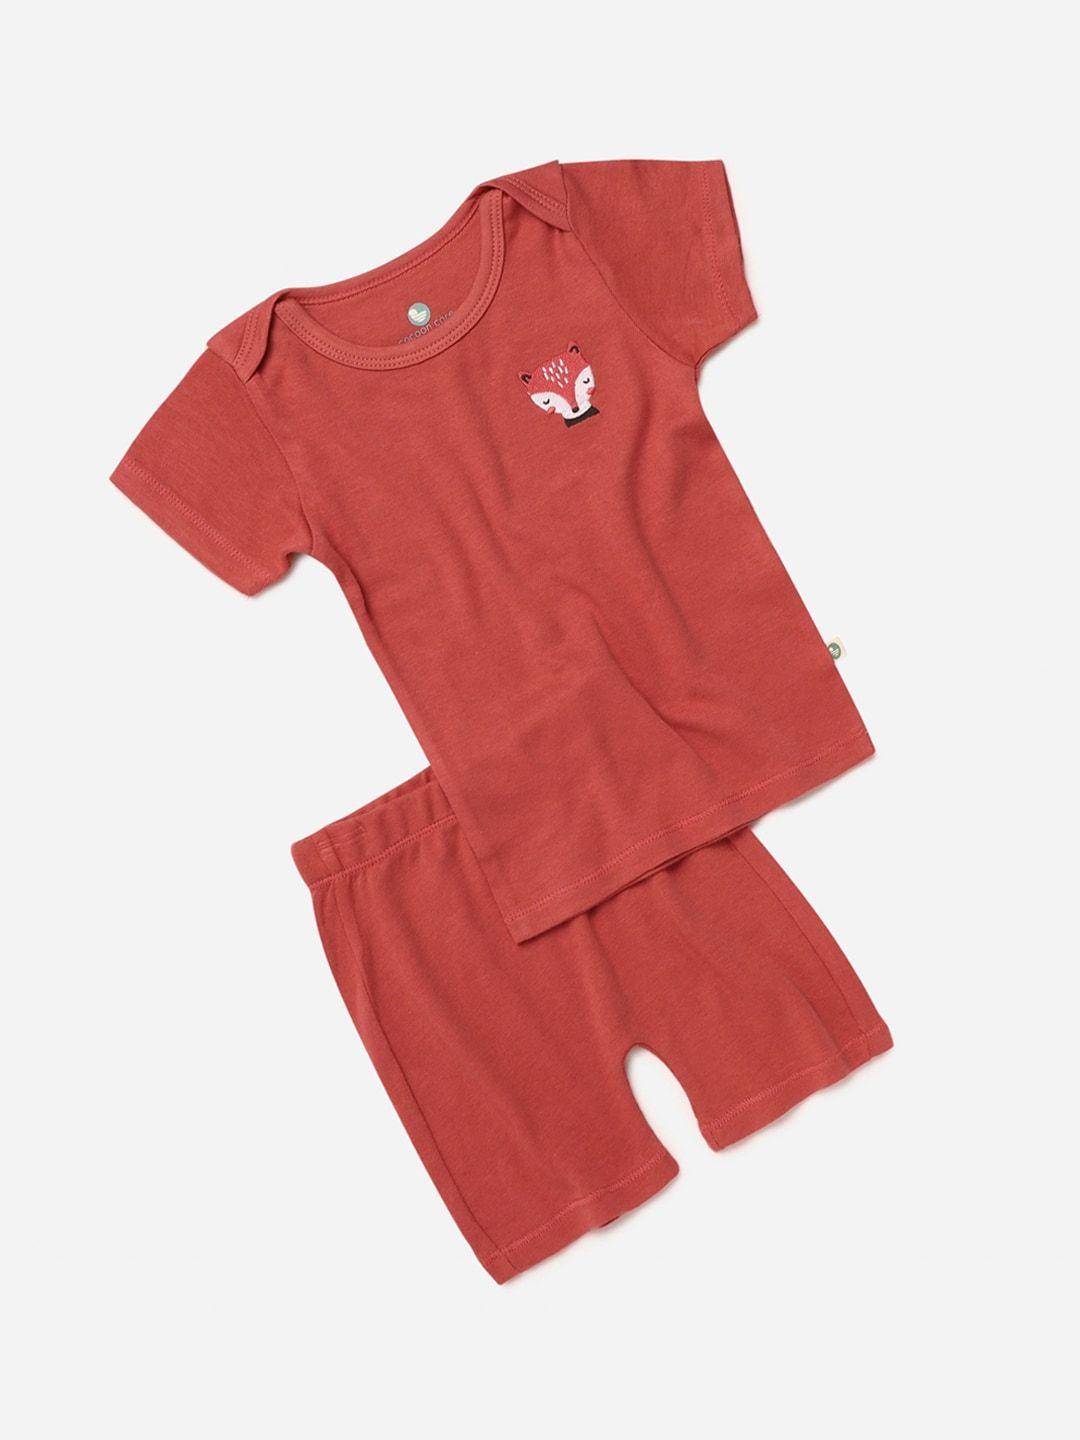 cocoon-care-unisex-kids-red-sustainable-clothing-set